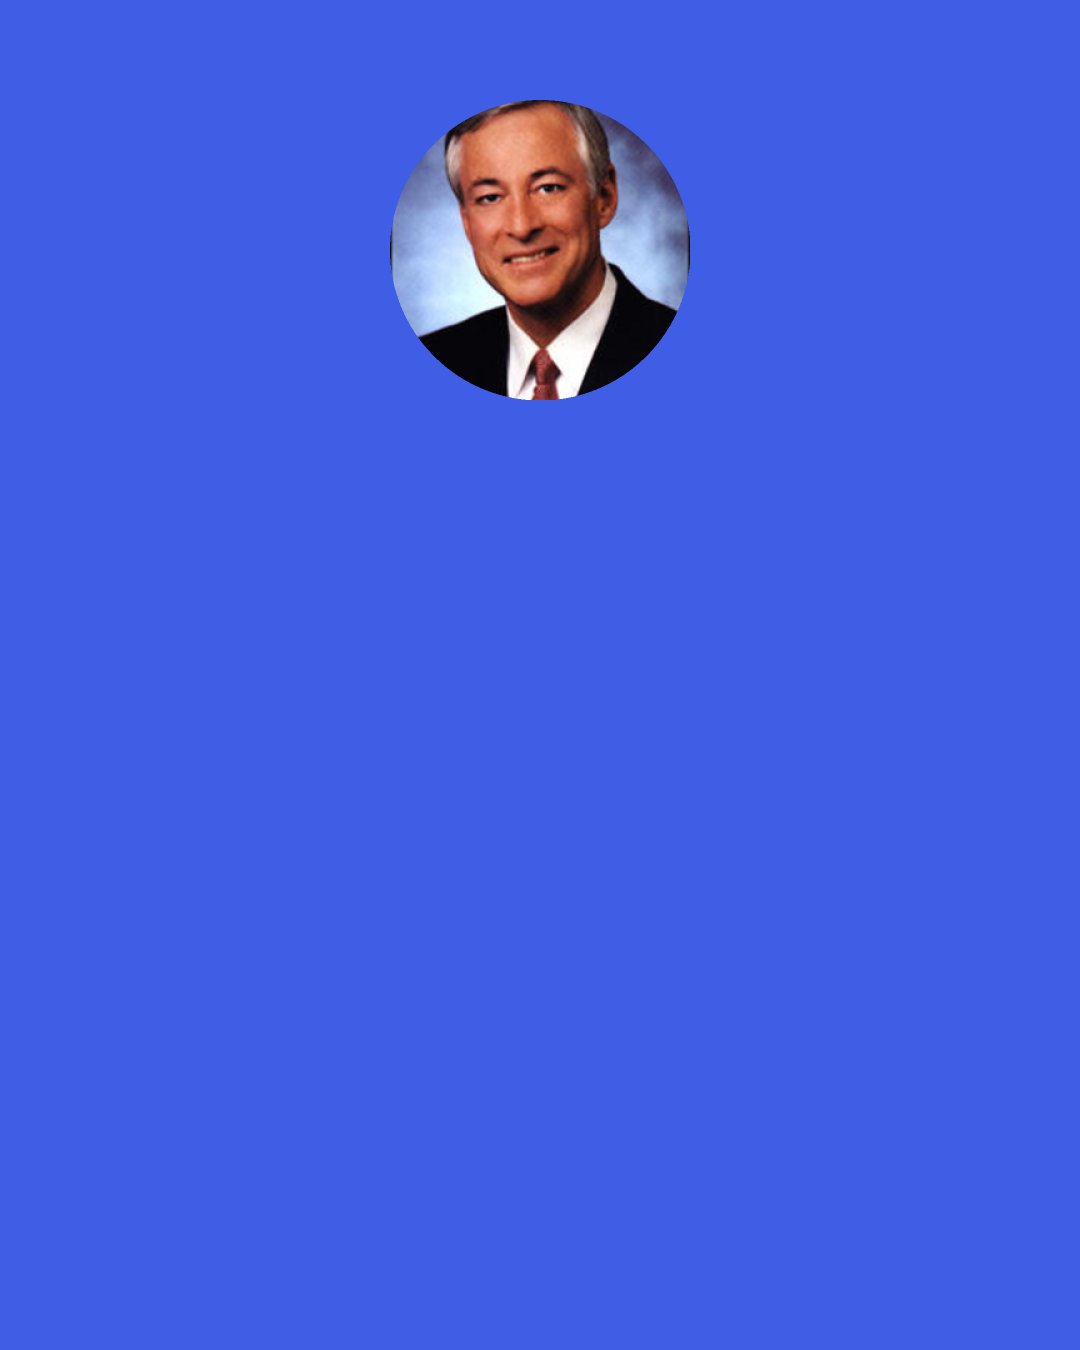 Brian Tracy: Truly wealthy people develop the habit of "getting rich slow" rather than "getting rich quick." To assure this, they have two rules with regard to money. Rule number one: Don't lose money. Rule number two: If ever you feel tempted, refer back to rule number one, "don't lose money."